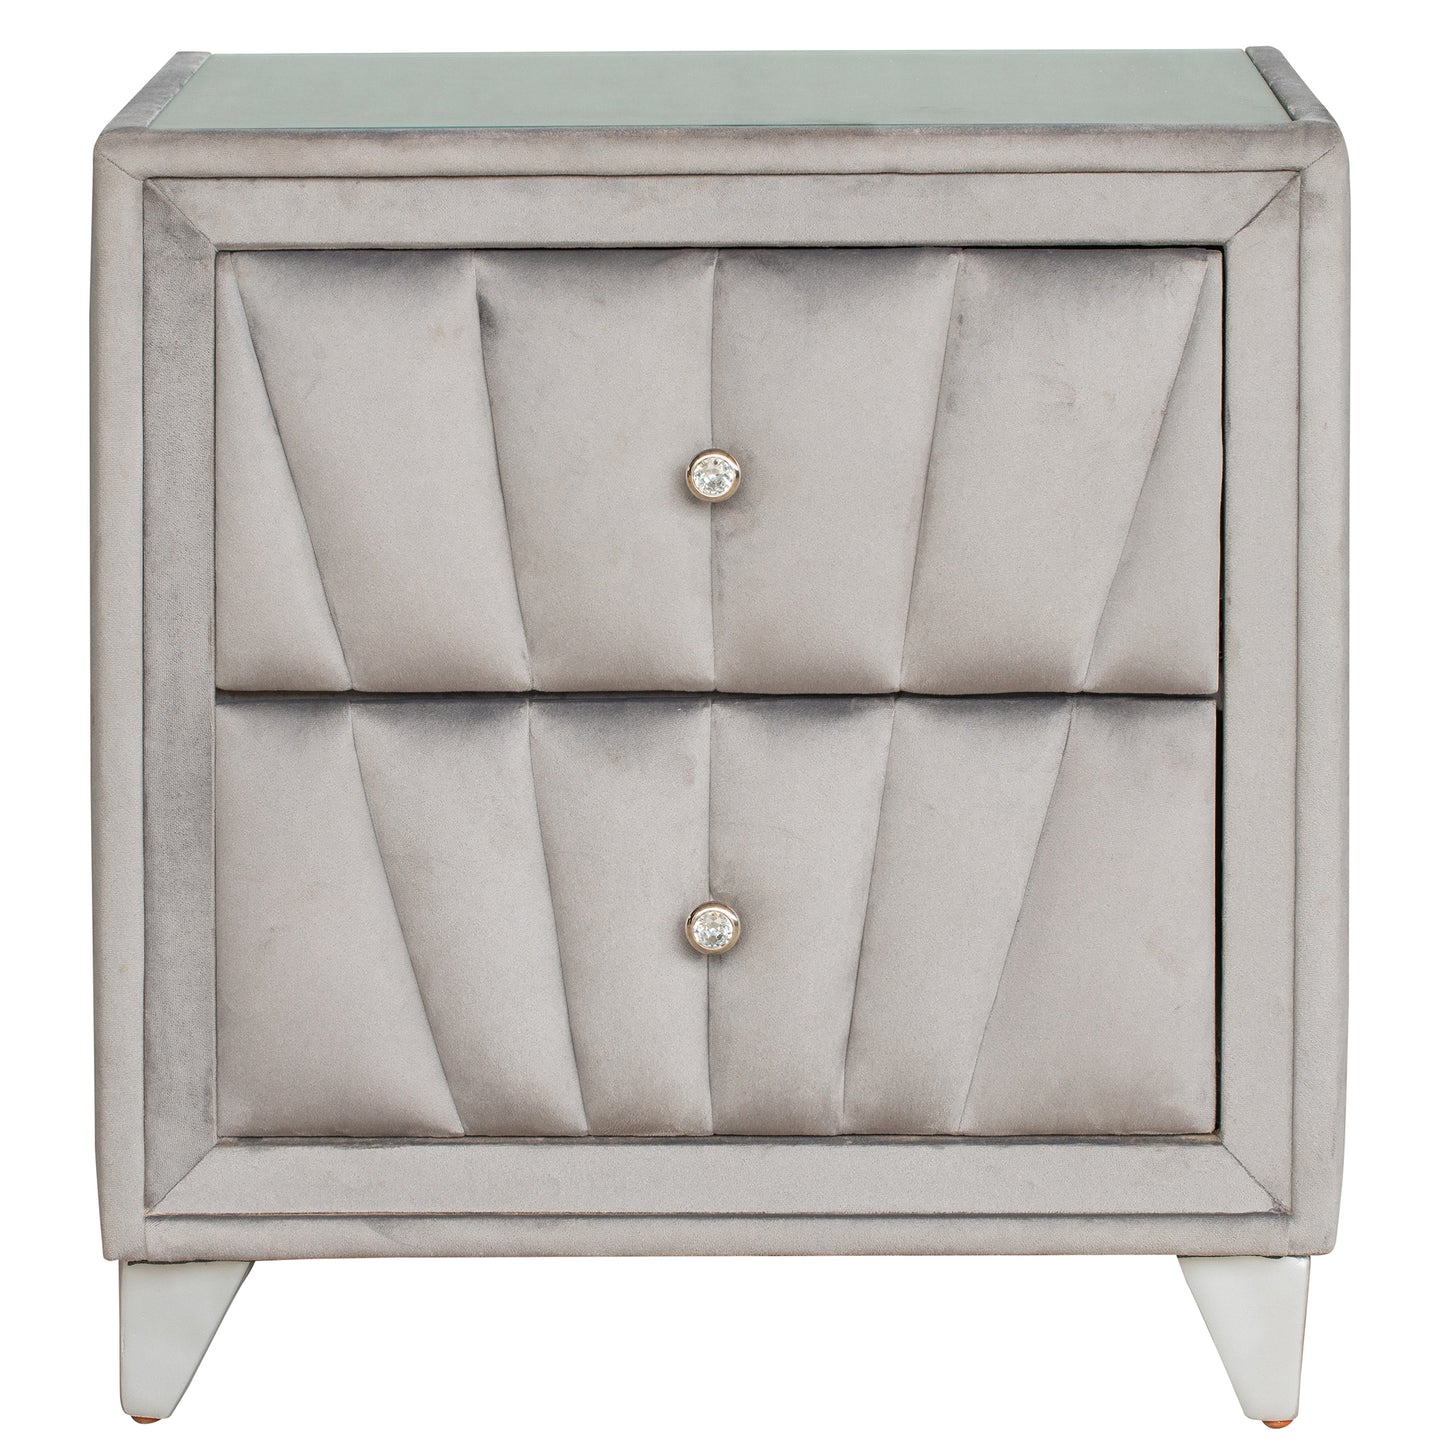 Upholstered Wooden Nightstand with Two Drawers